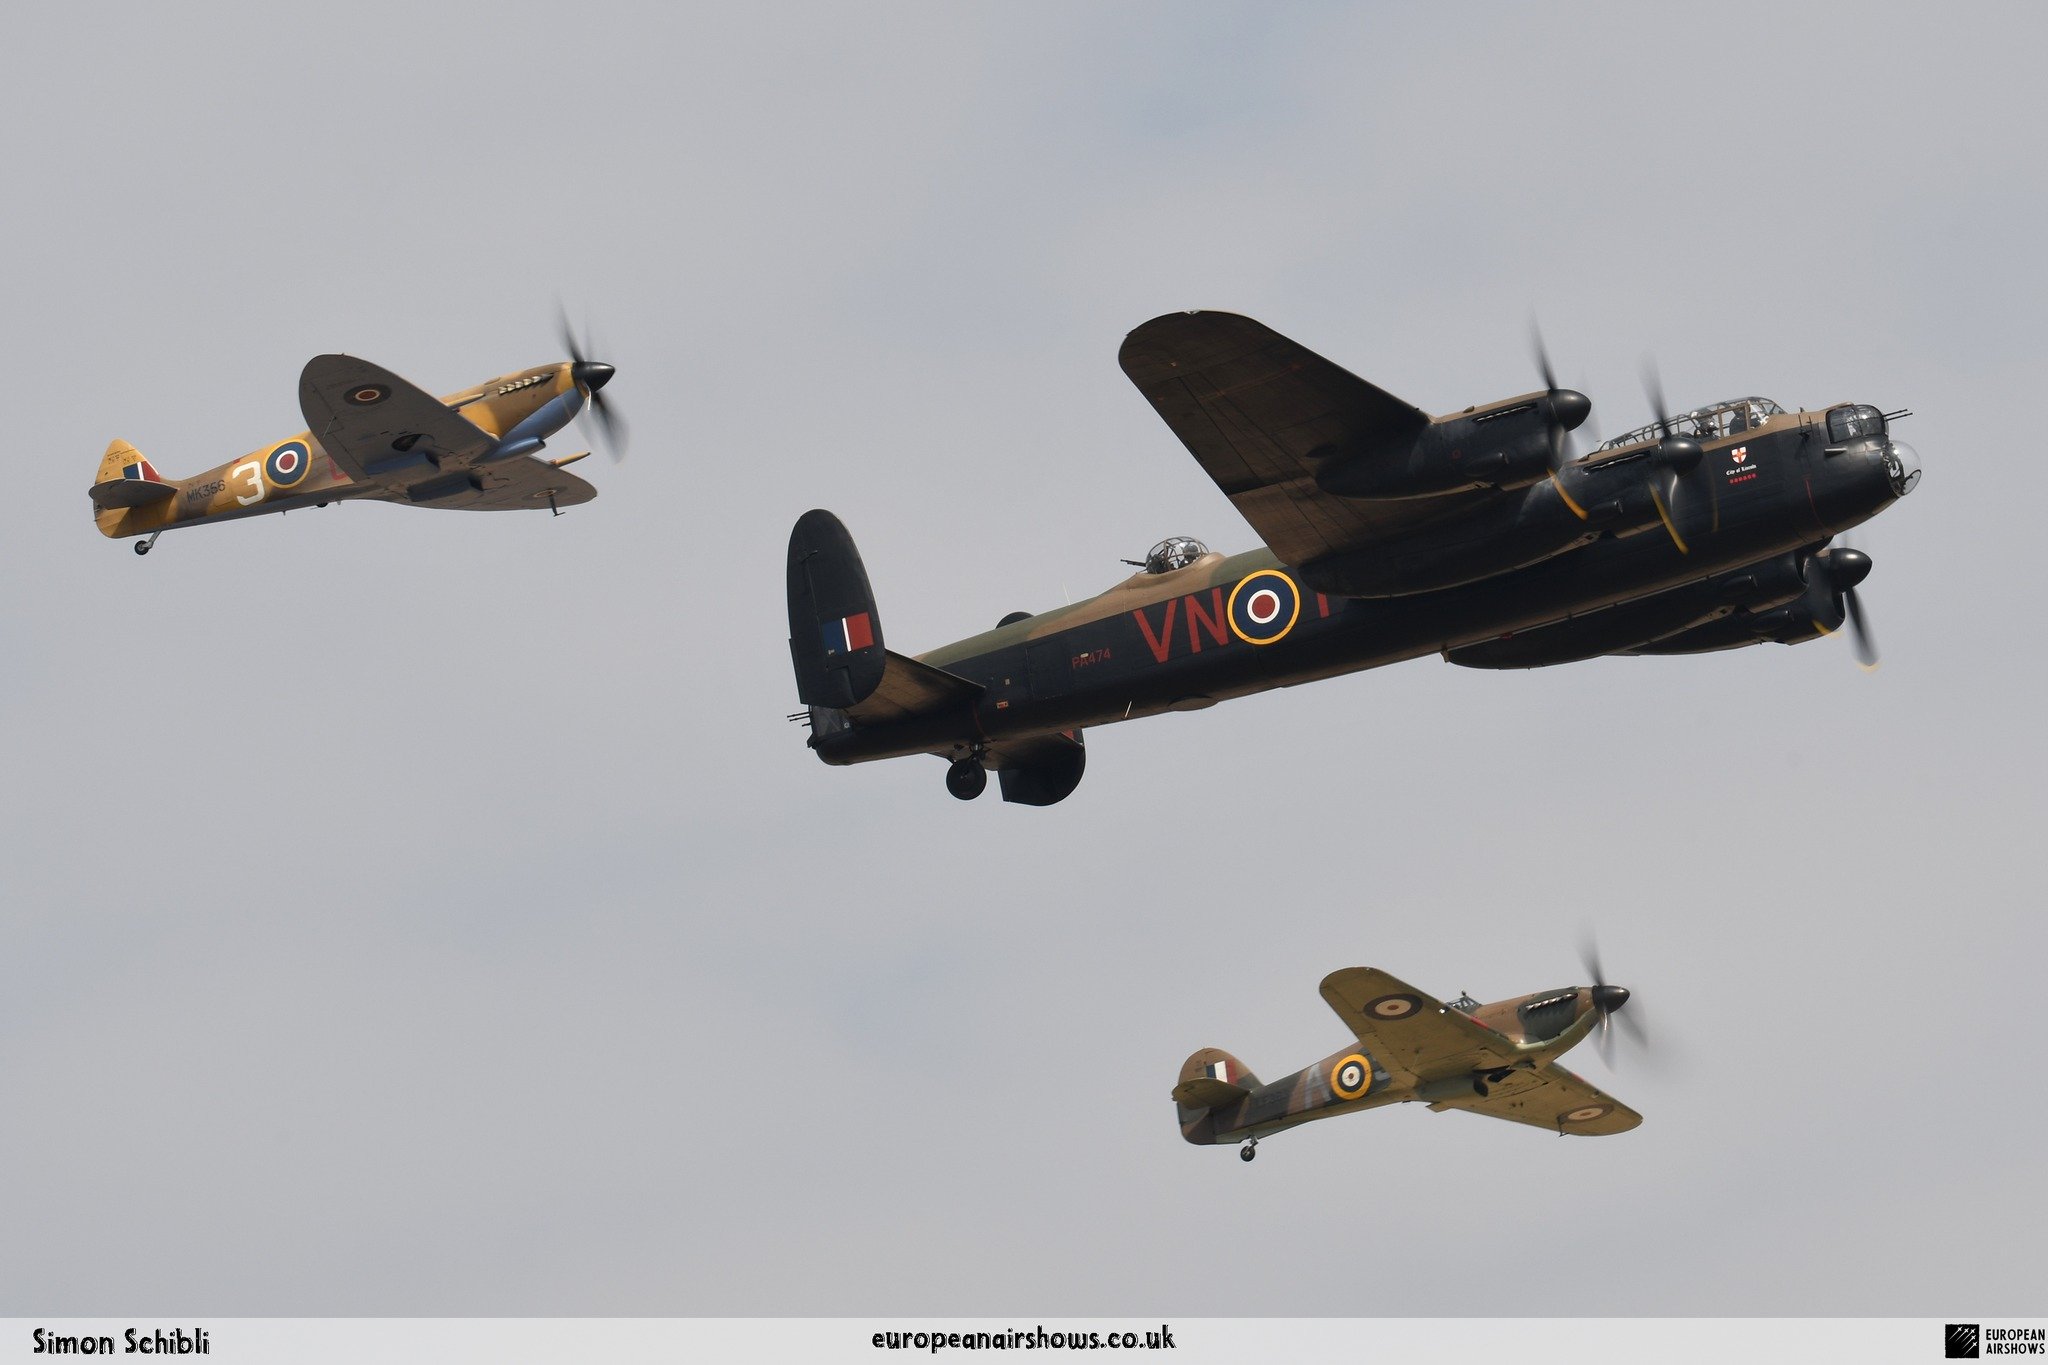 𝐀𝐈𝐑𝐒𝐇𝐎𝐖 𝐍𝐄𝐖𝐒: The Sanicole Airshow has recently announced that the Battle of Britain Memorial Flight (BBMF) trio, which includes the iconic Lancaster, Spitfire and Hurricane planes, will be performing at this year's event.

Read more on ou